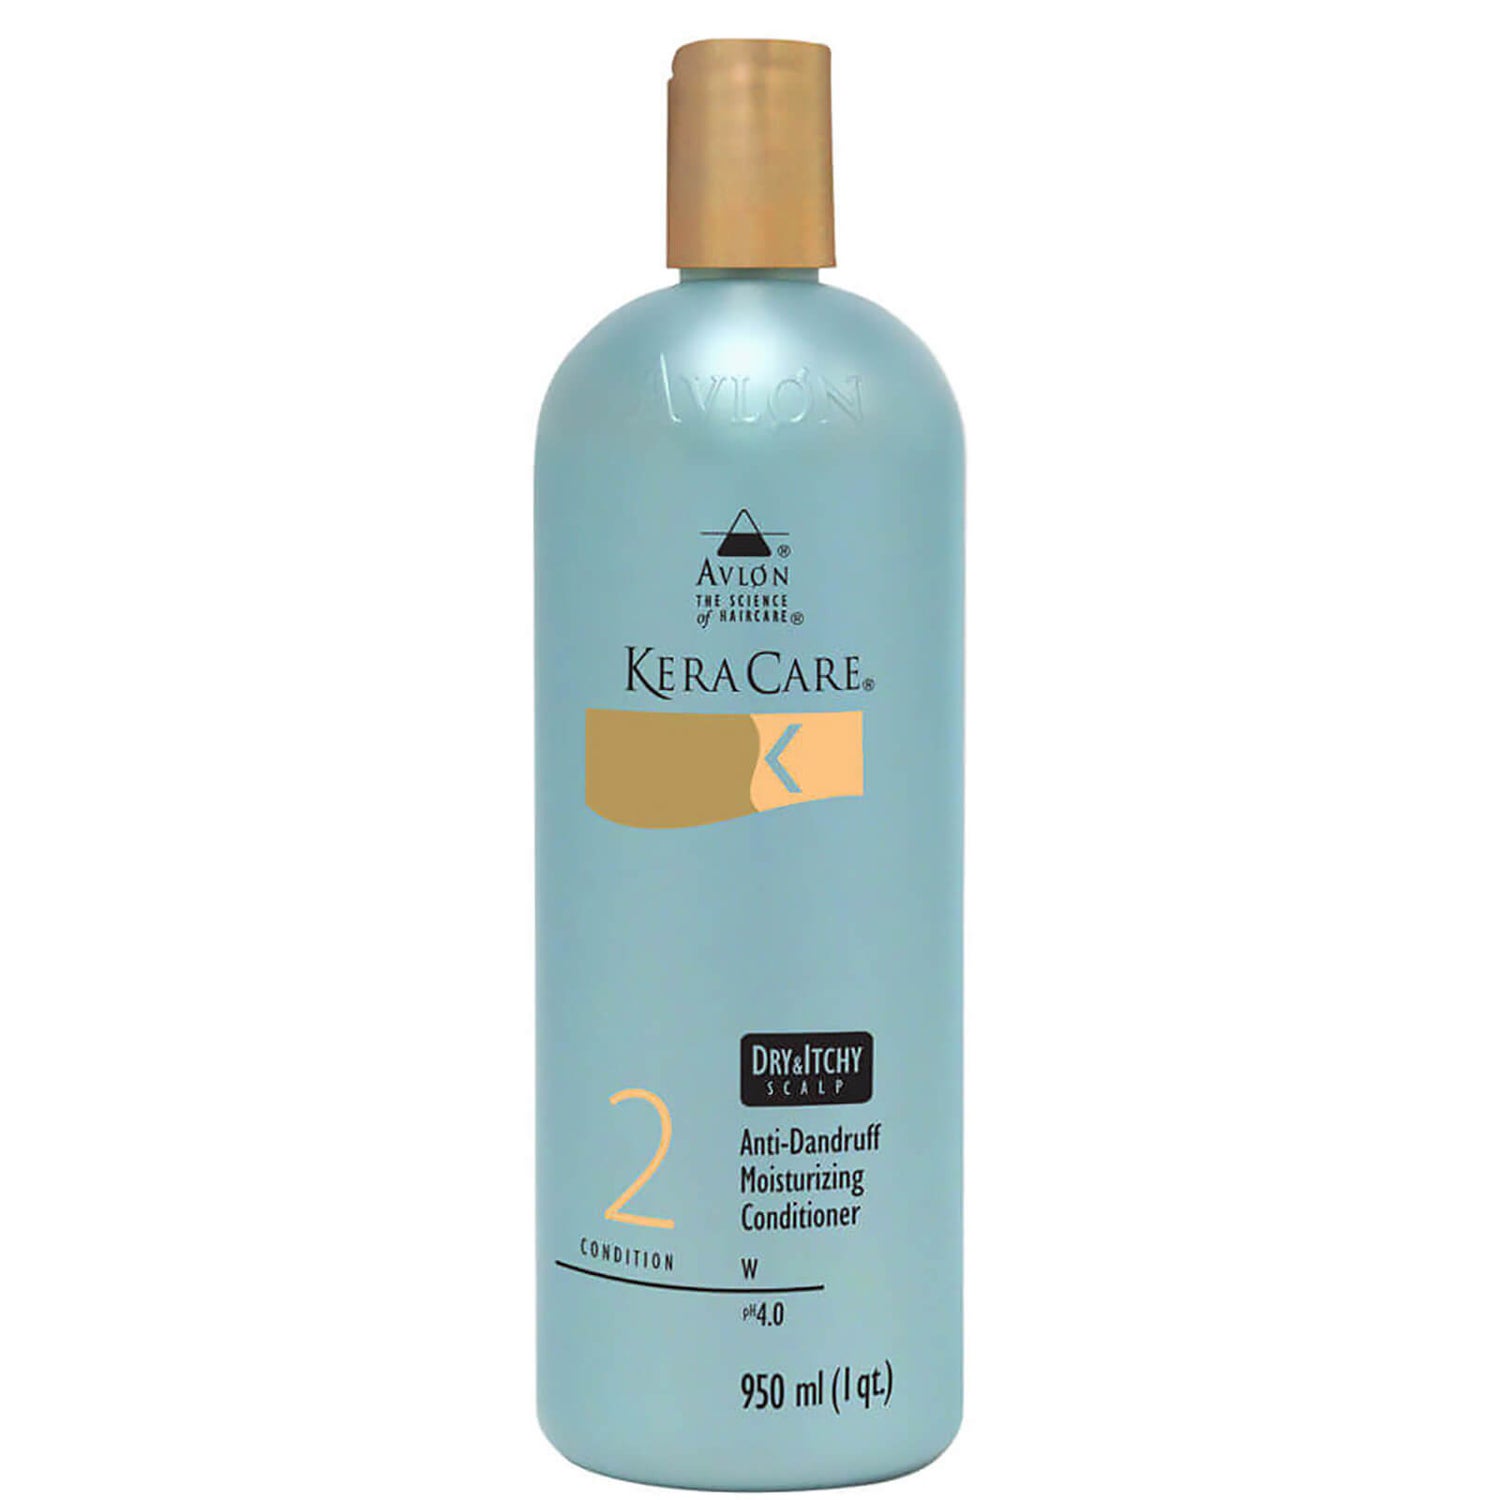 KeraCare Dry and Itchy Scalp Moisturizing Conditioner (950ml)